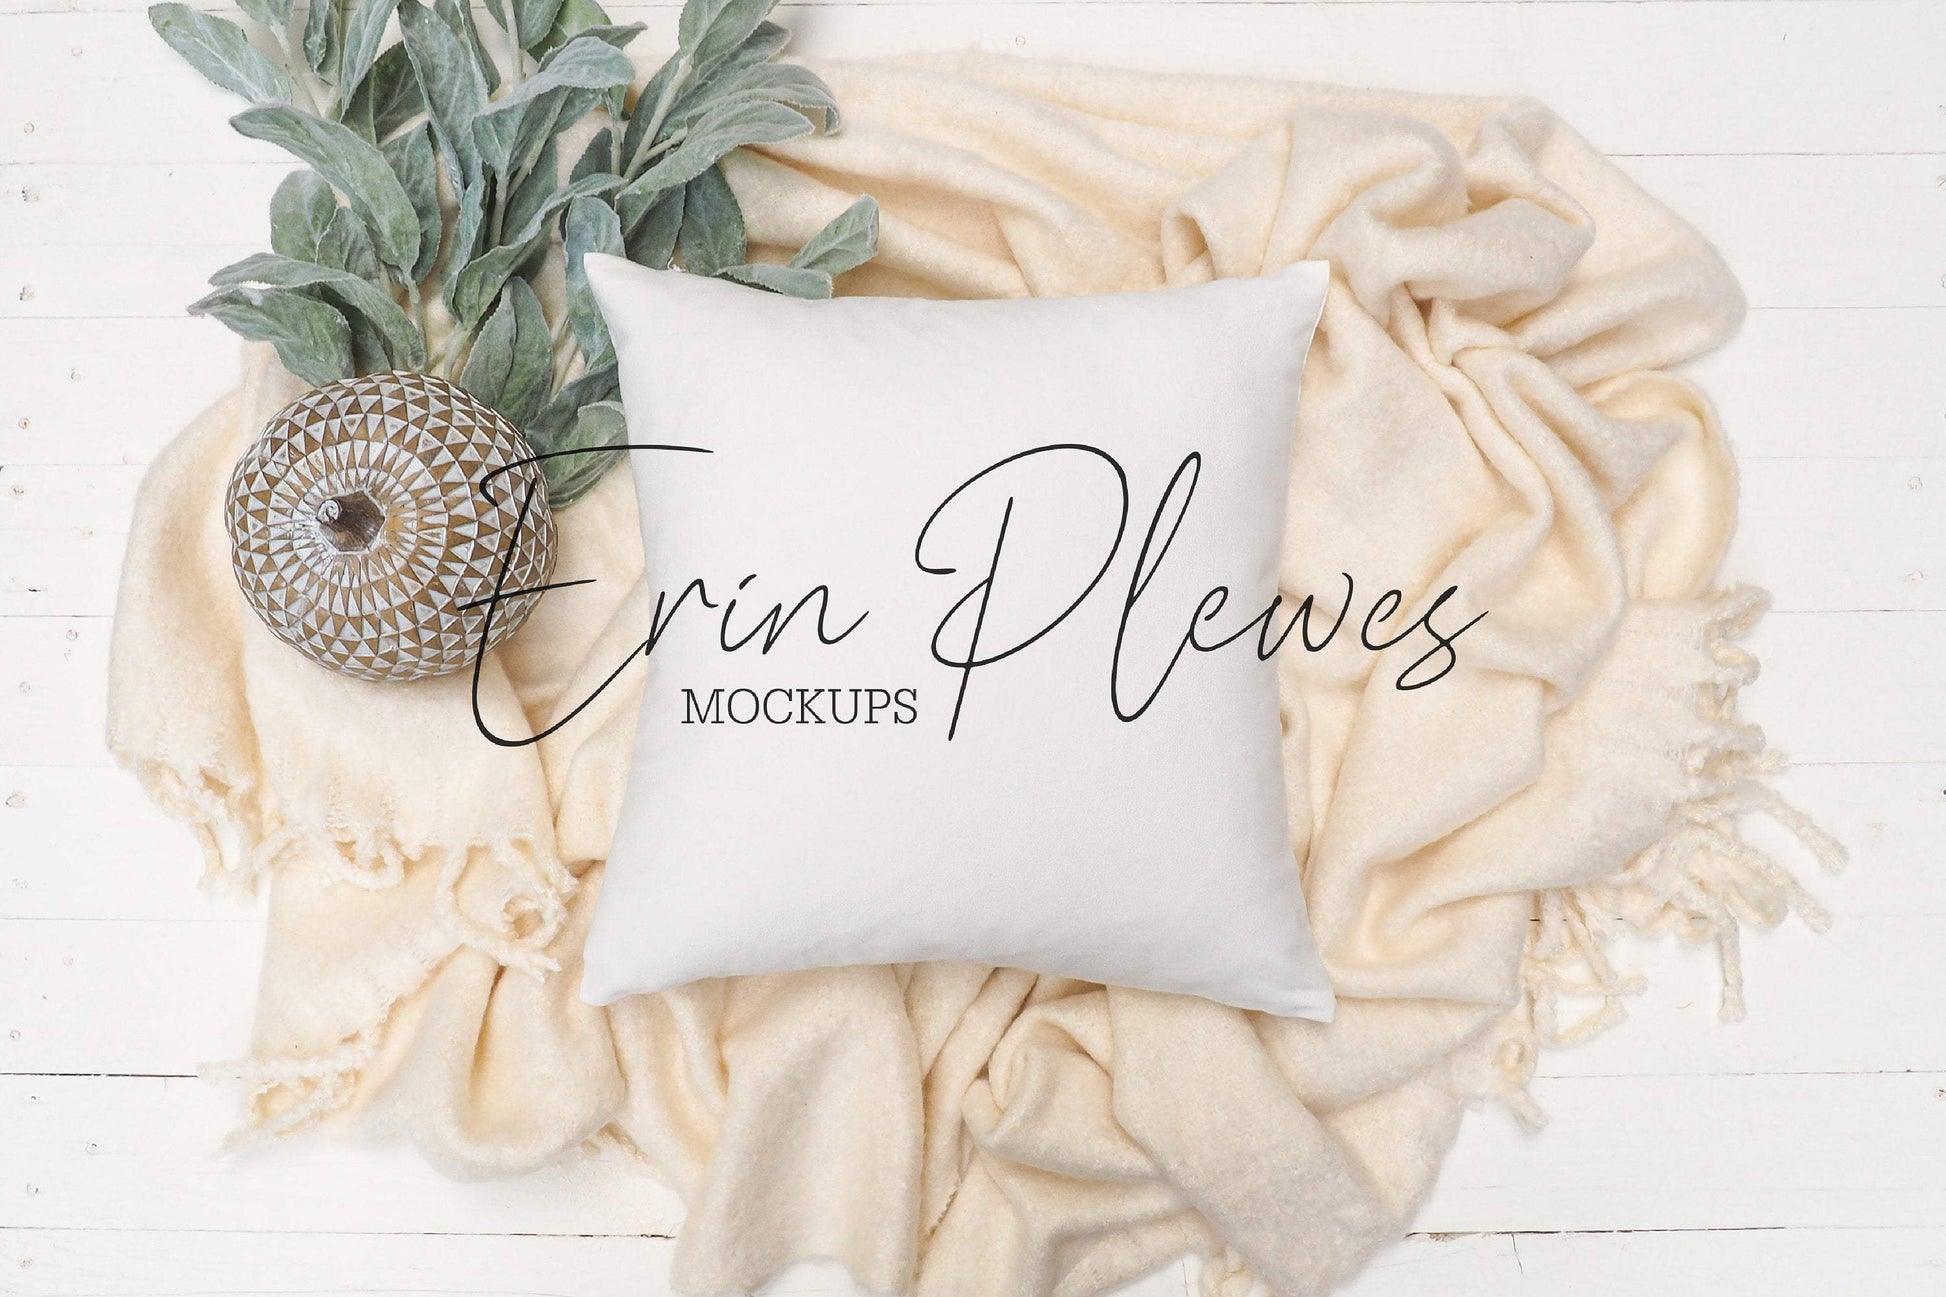 Erin Plewes Mockups Pillow Mockup, Throw Pillow Mock Up with Blanket and Pumpkin, Fall Farmhouse Style Stock Photo, Cushion Mockup, Jpg Instant Digital Download